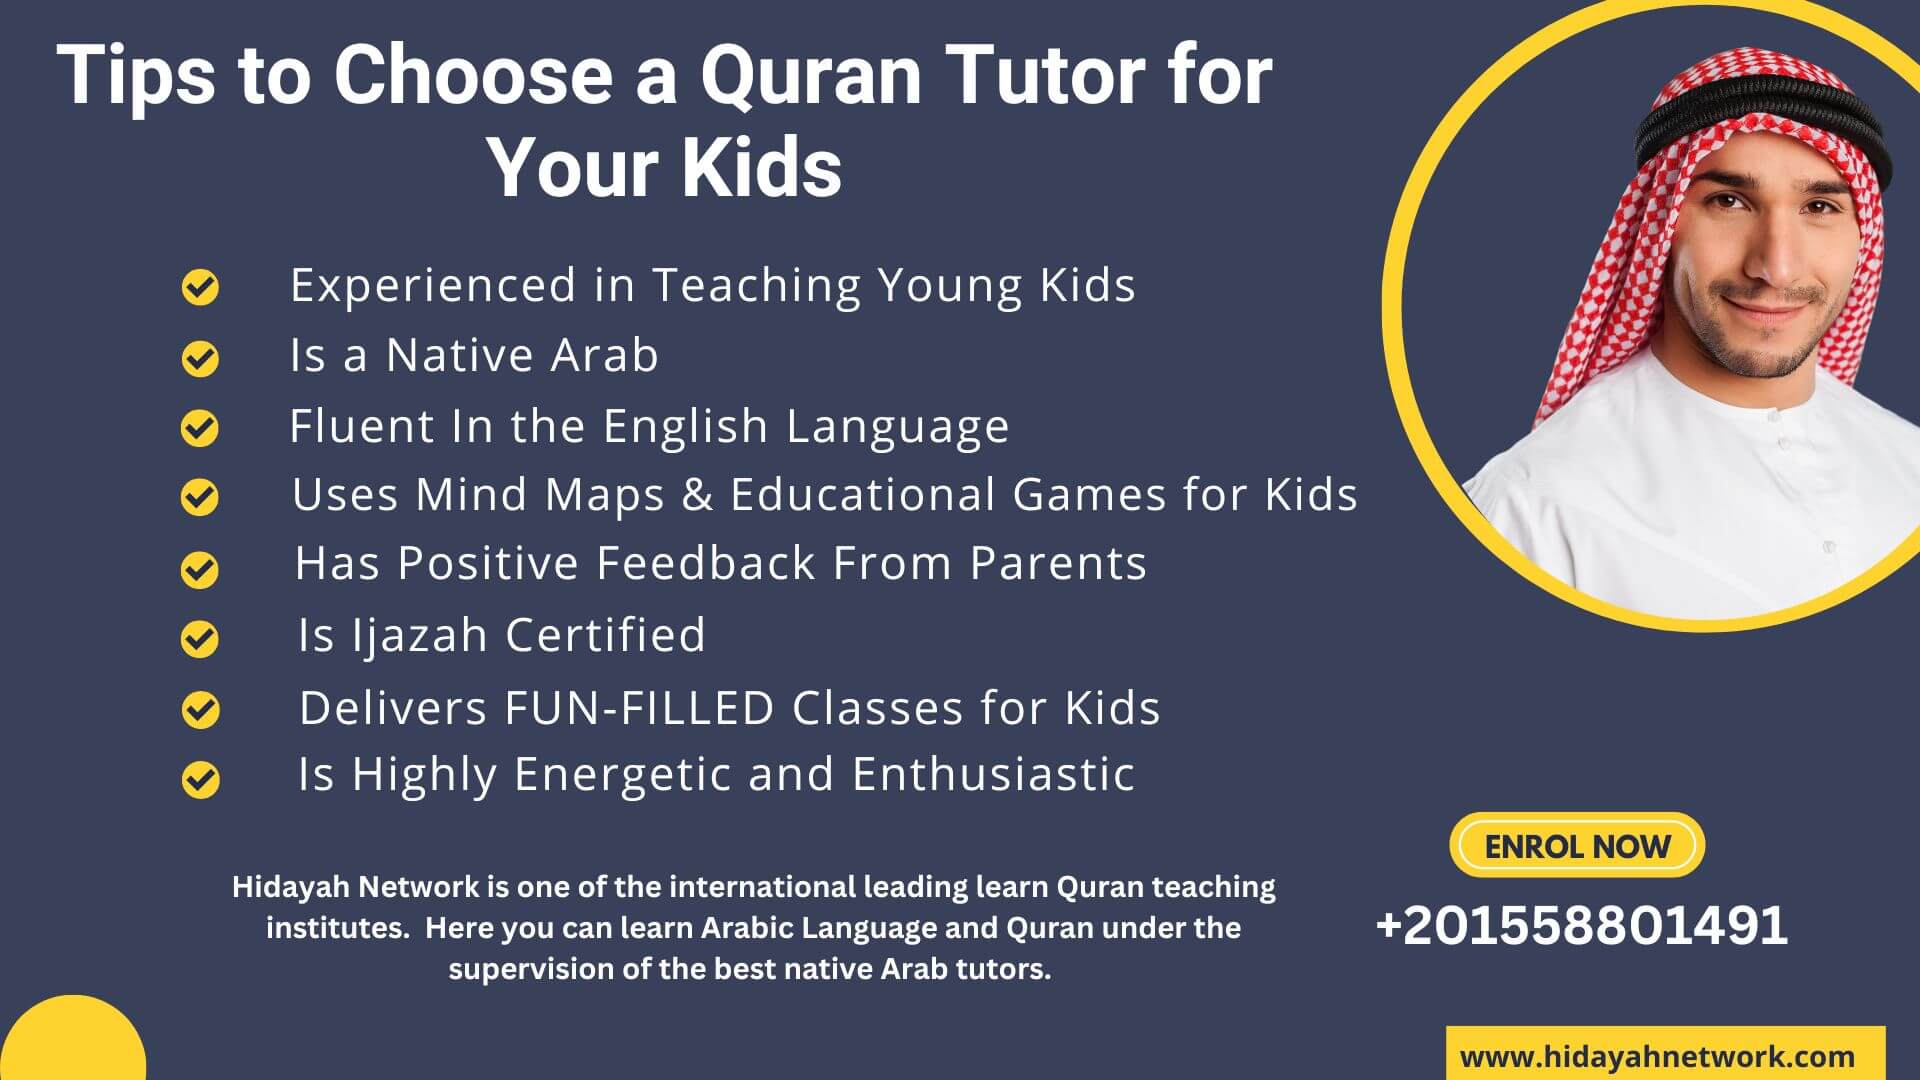 Choose a Quran Tutor for Your Kids